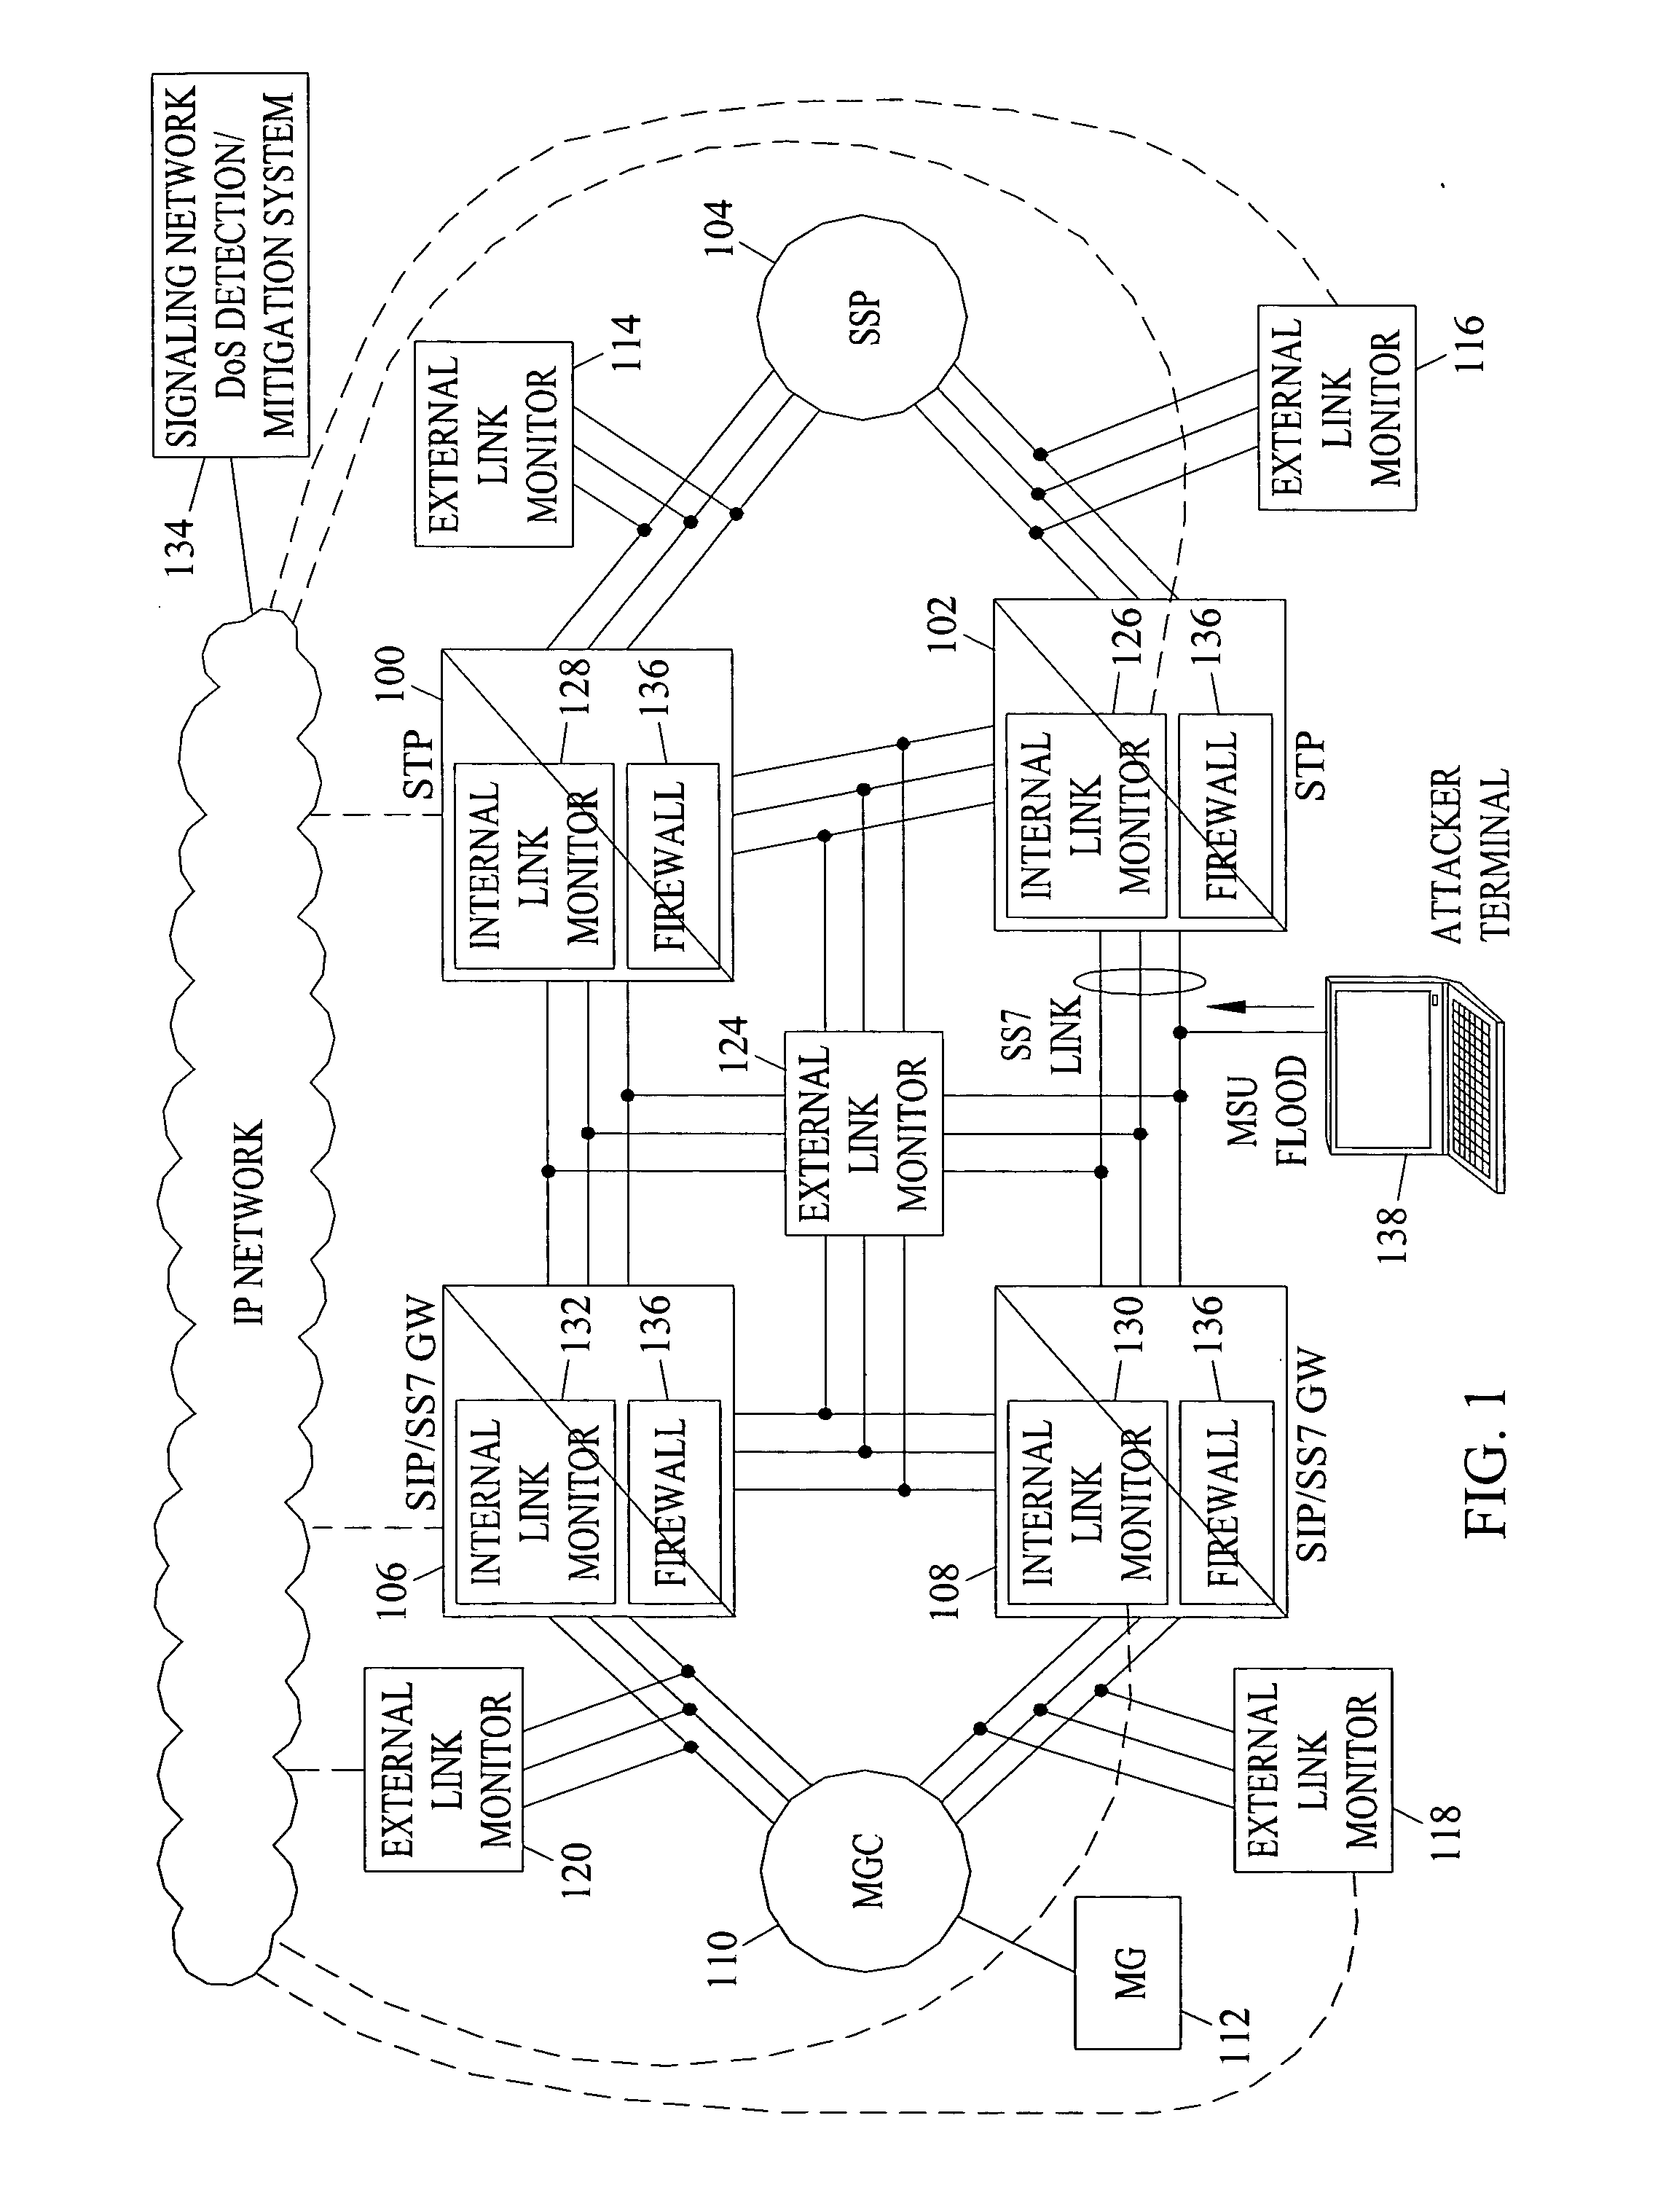 Methods, systems, and computer program products for detecting and mitigating denial of service attacks in a telecommunications signaling network